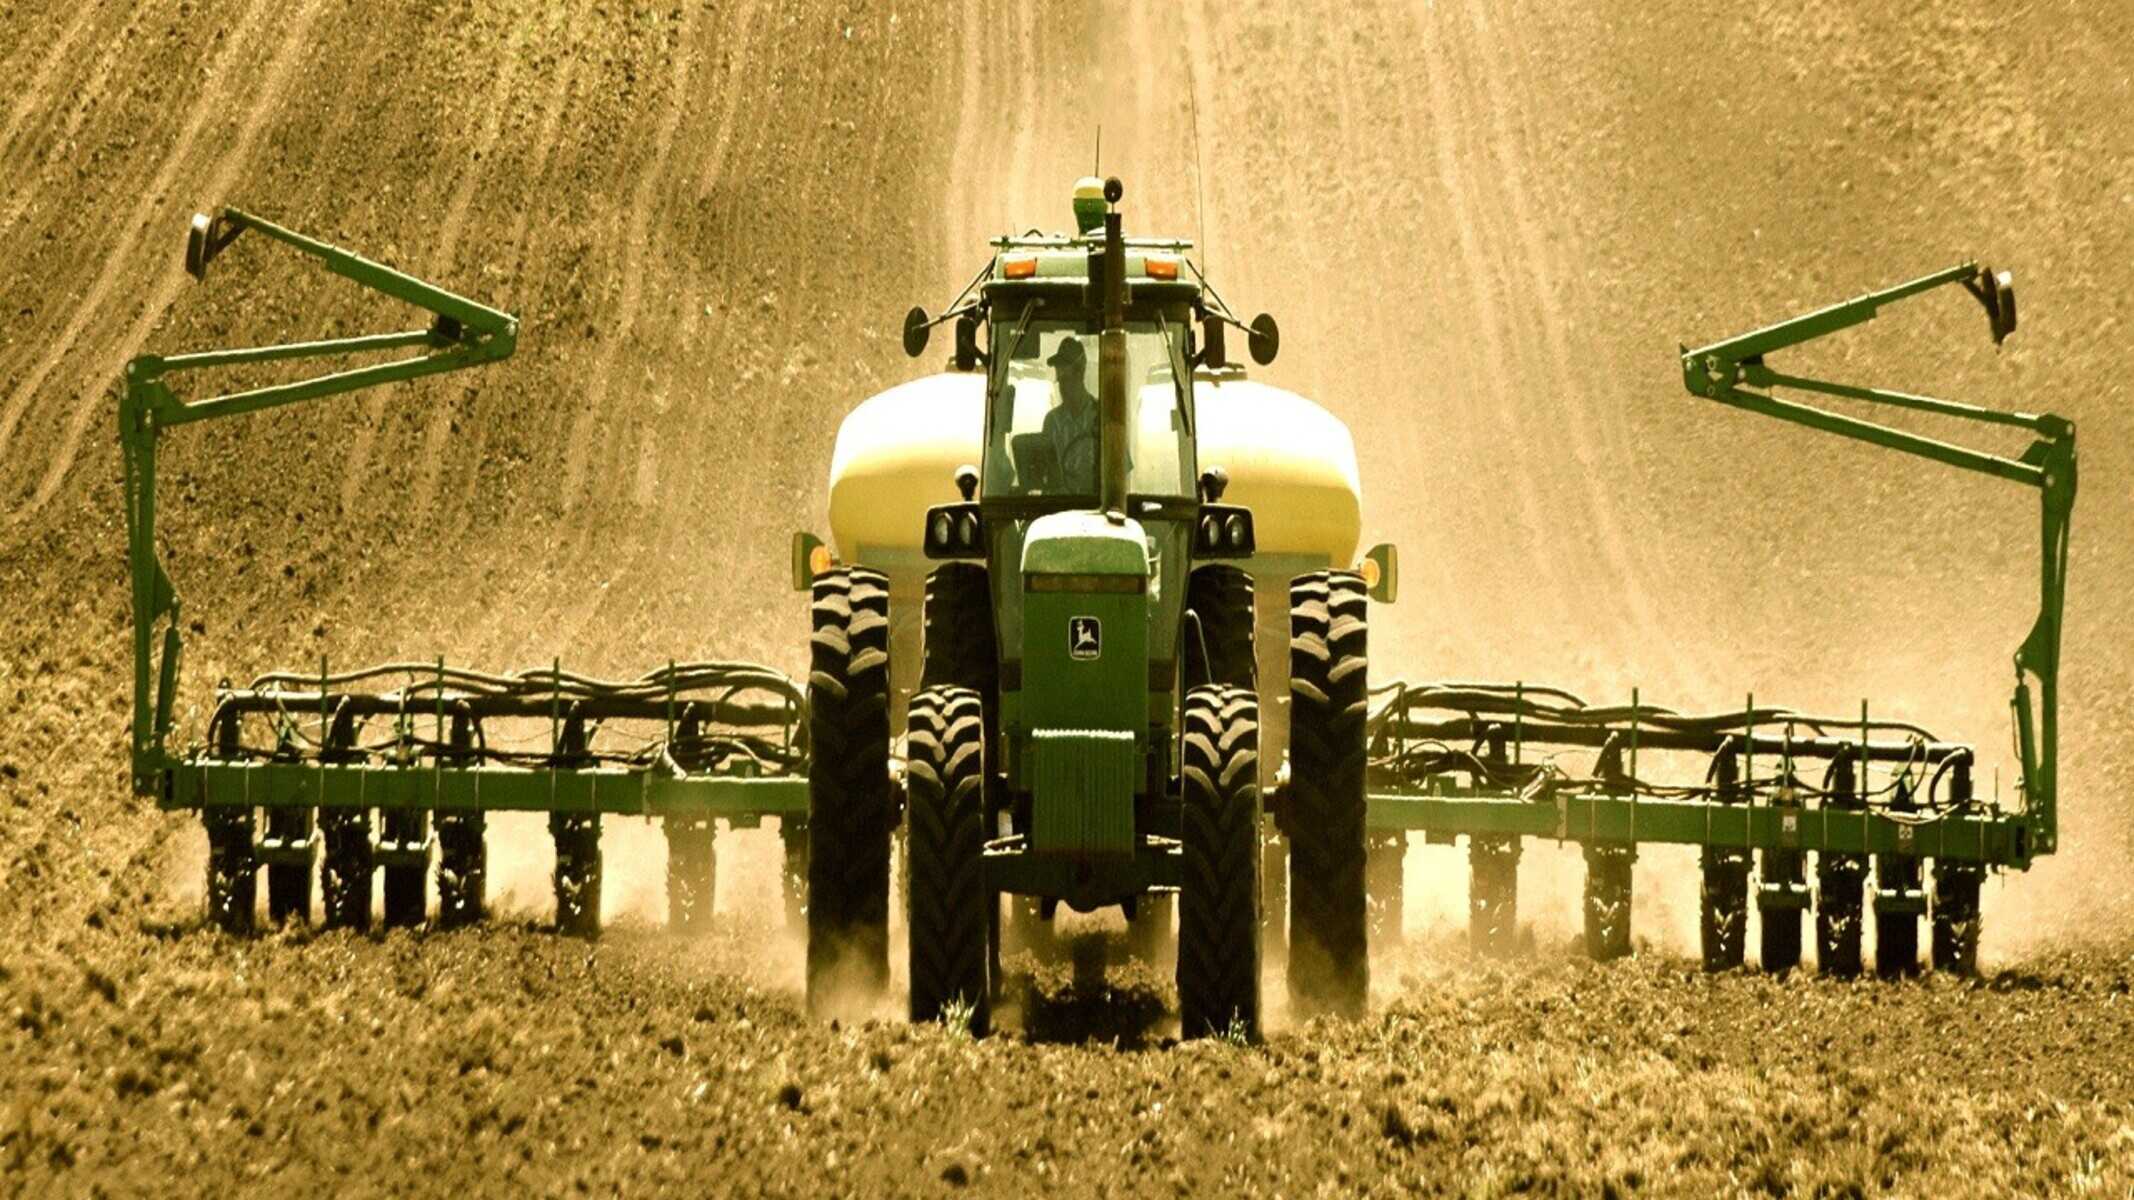 What Is Agricultural Technology